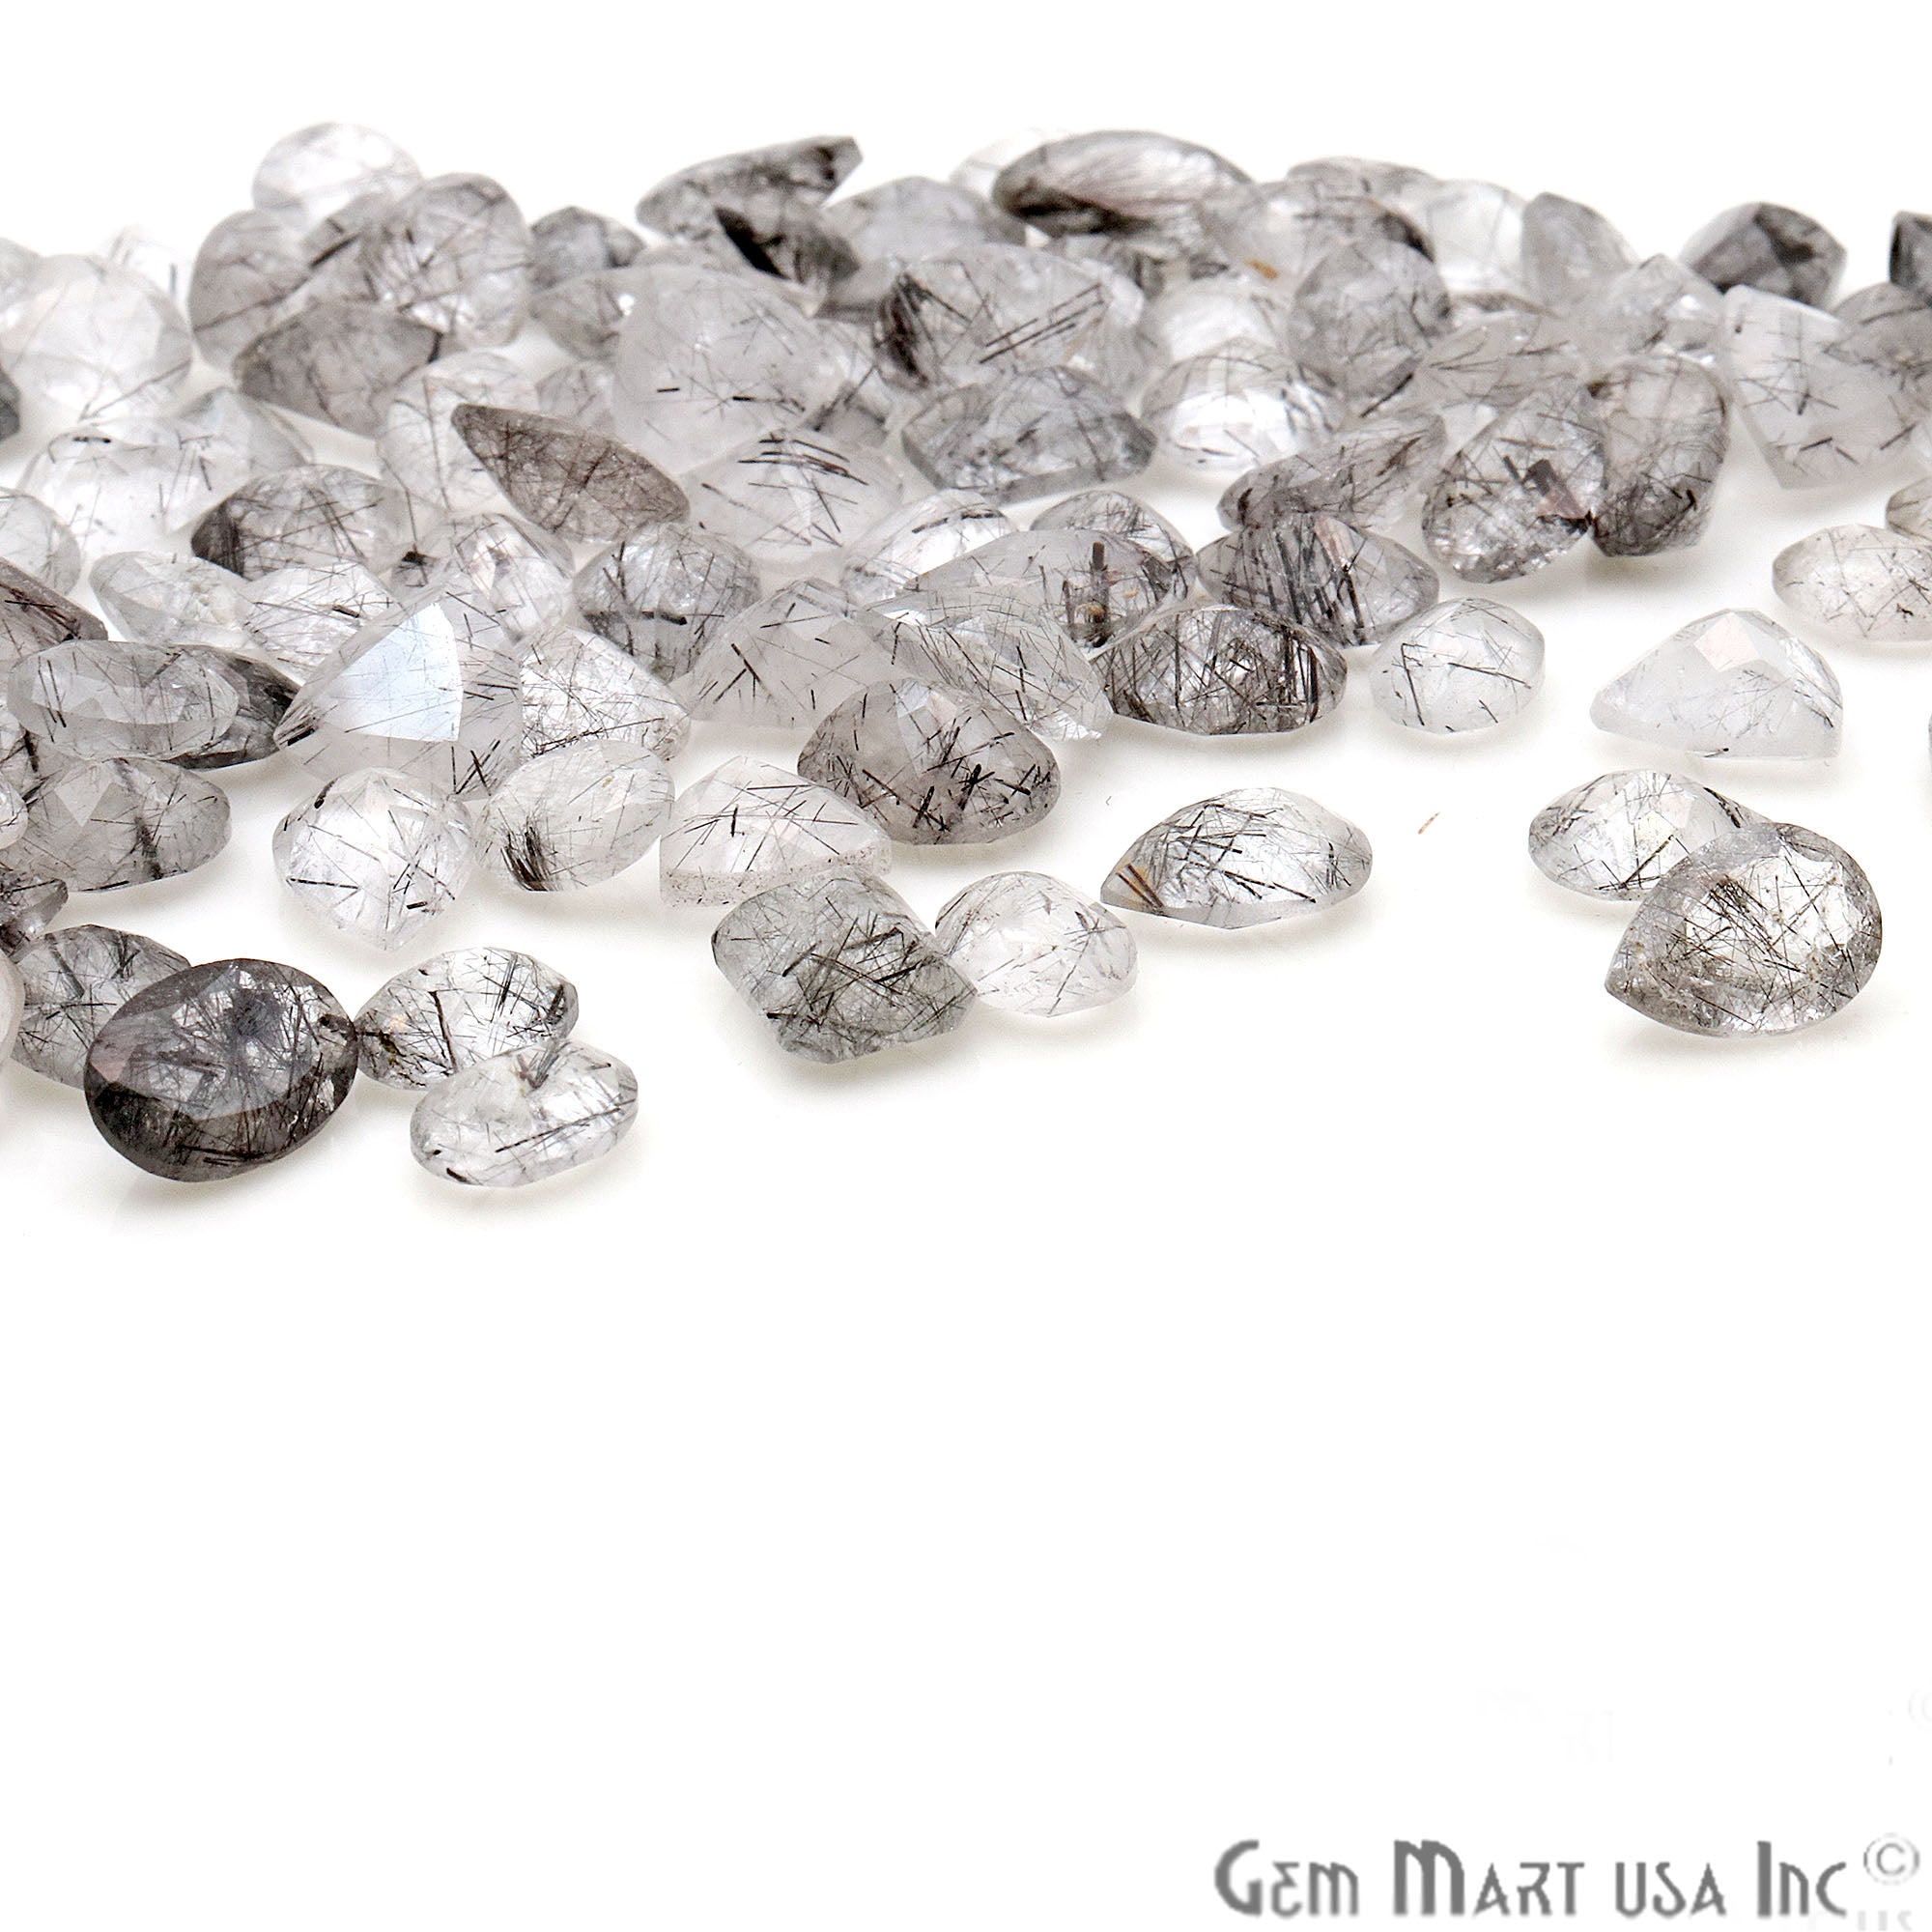 50ct Lot Rutilated Mix Shaped 7-10mm Stone, Faceted Gemstone Mixed lot, Loose Stones - GemMartUSA